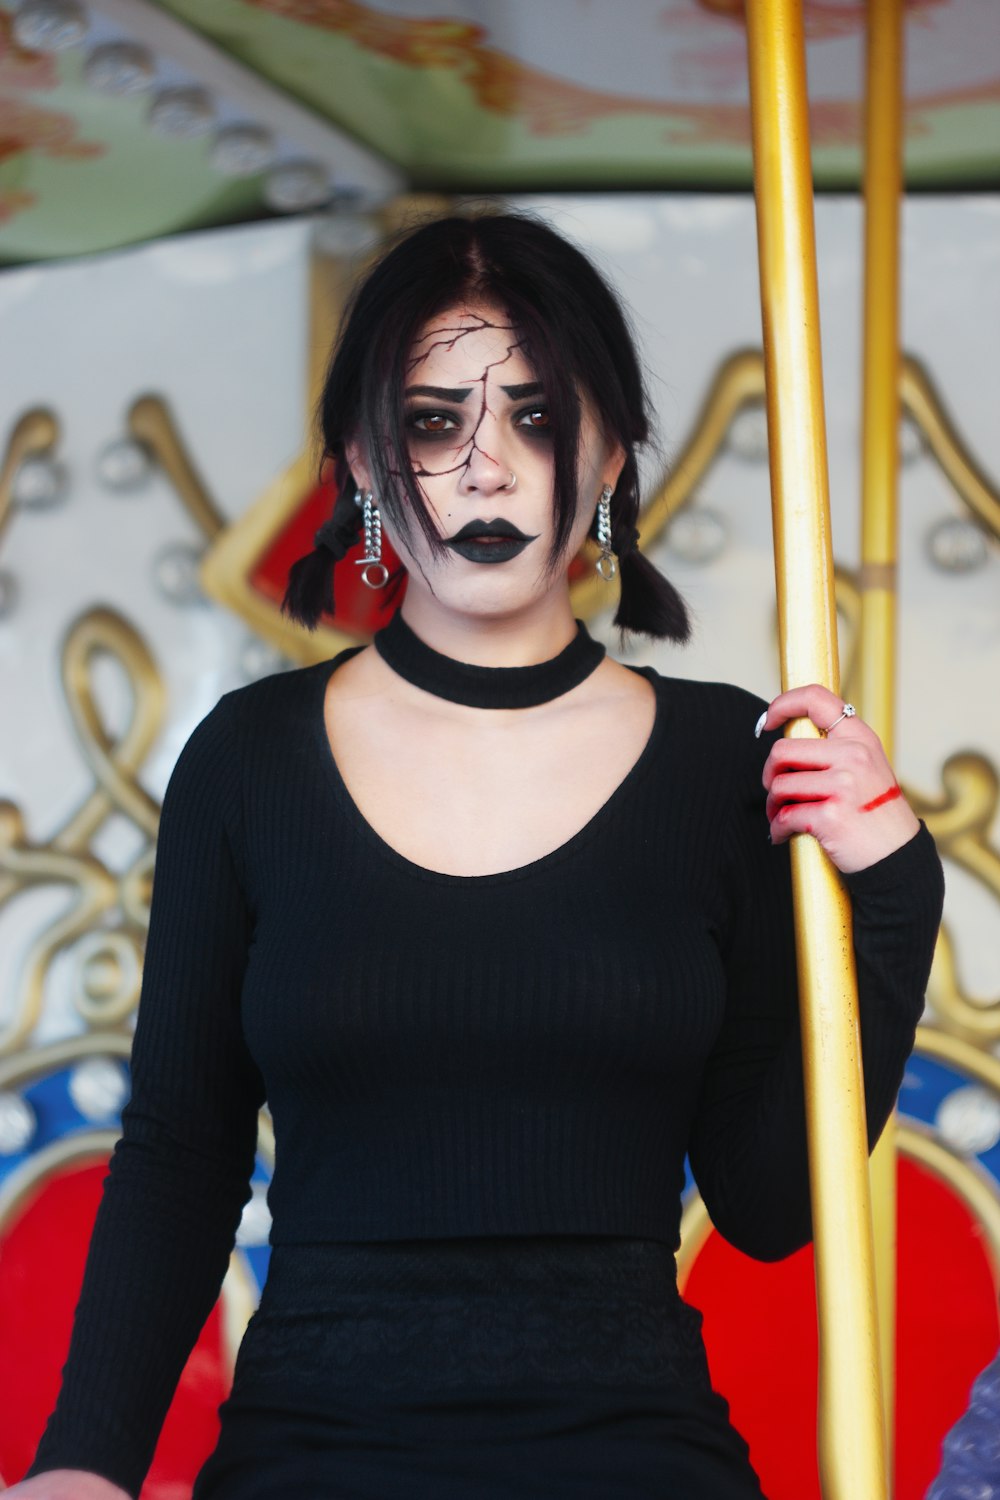 a woman with black makeup holding a pole